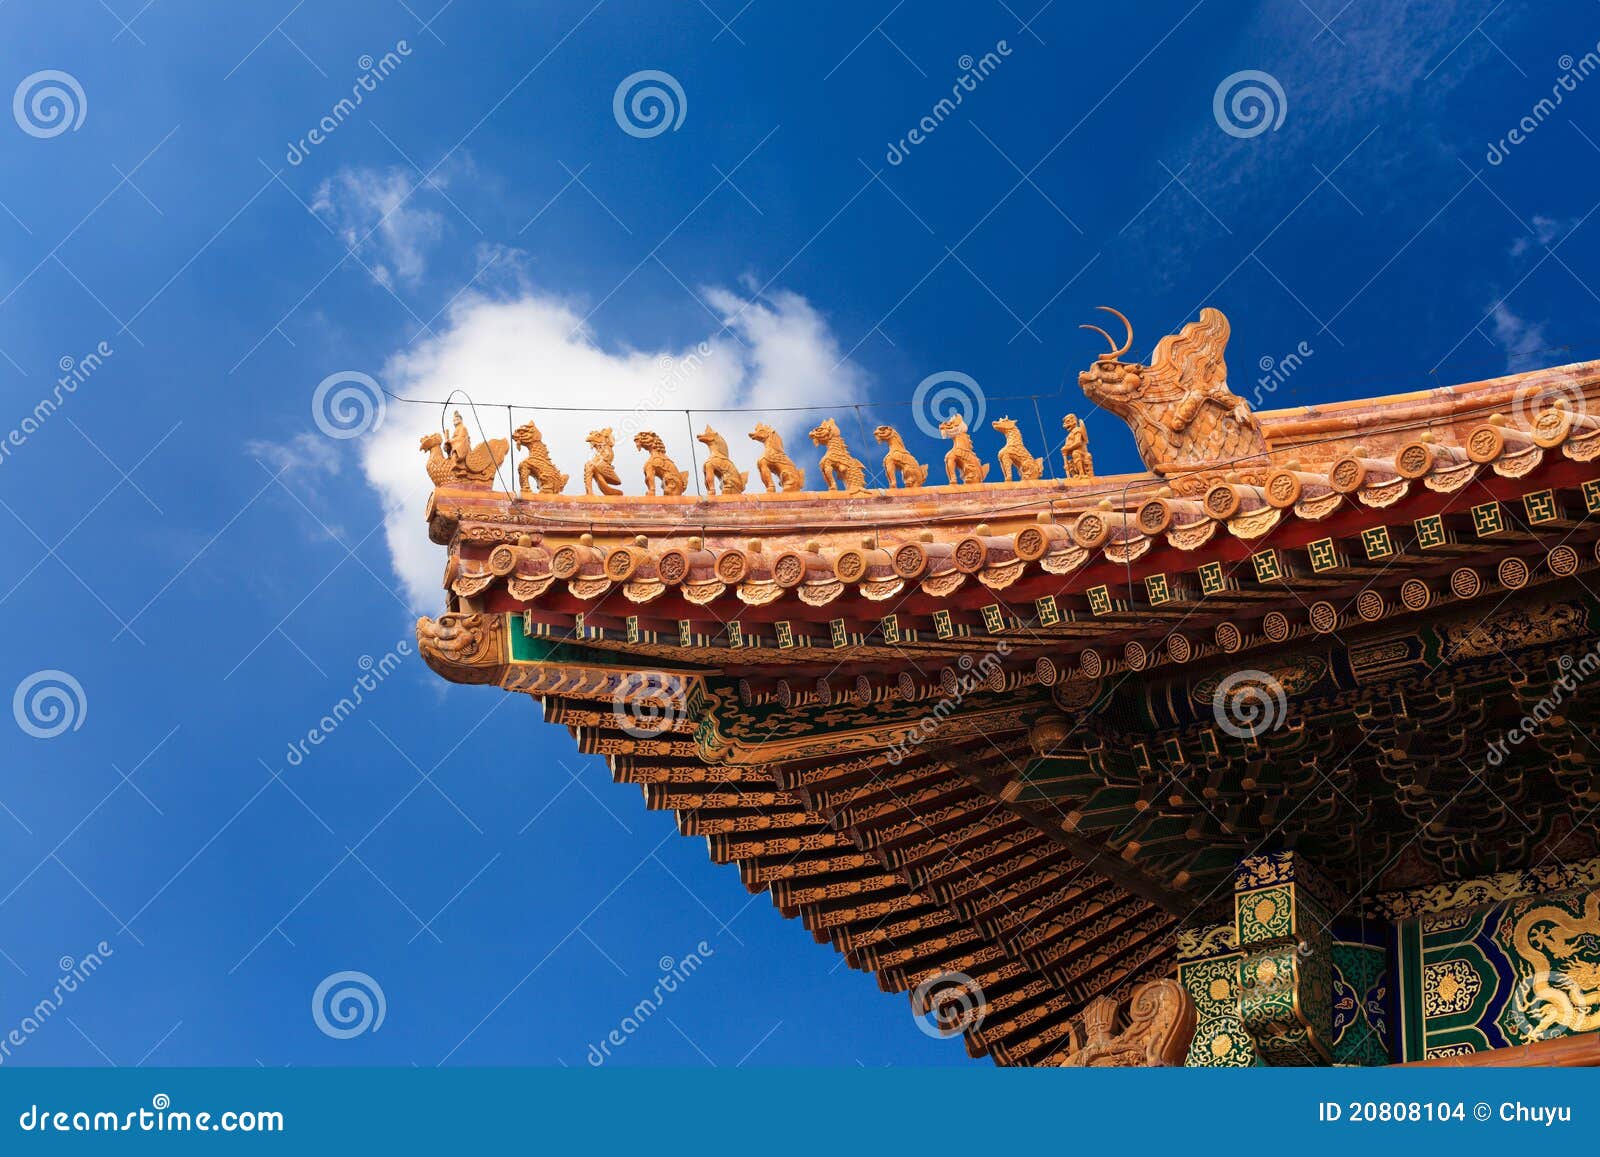 the eaves in the forbidden city